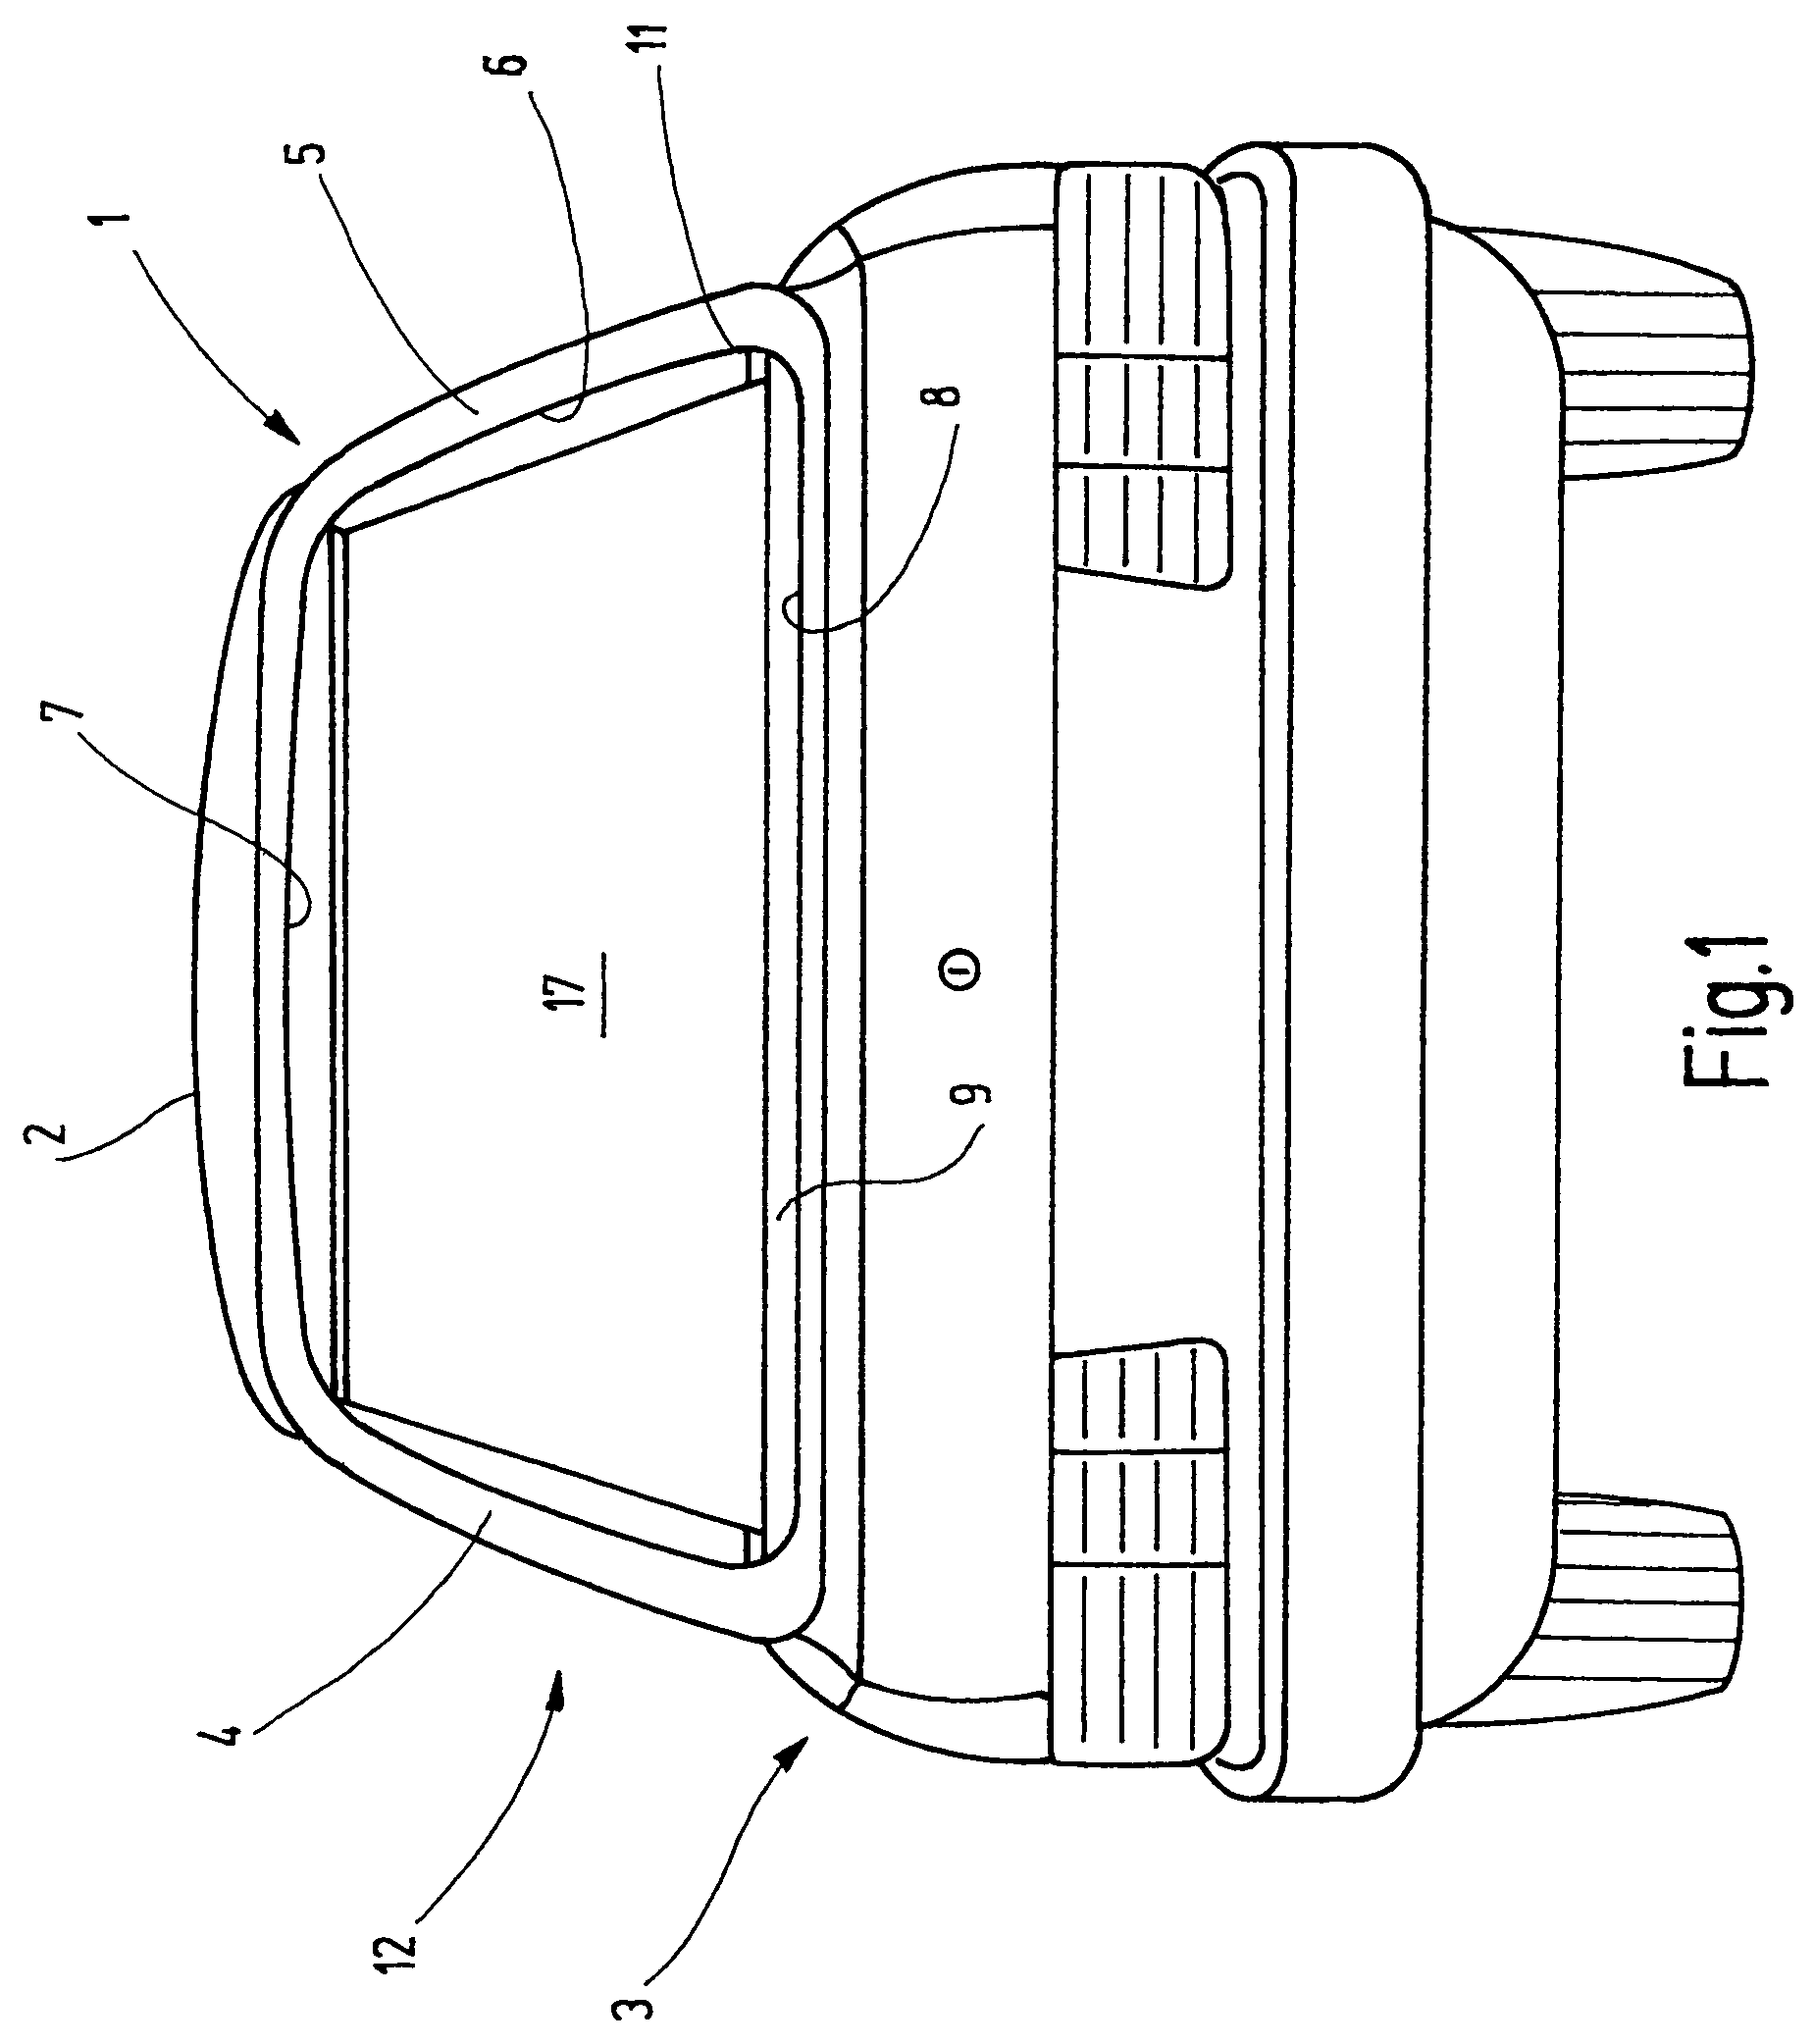 Window shade with coil spring drive